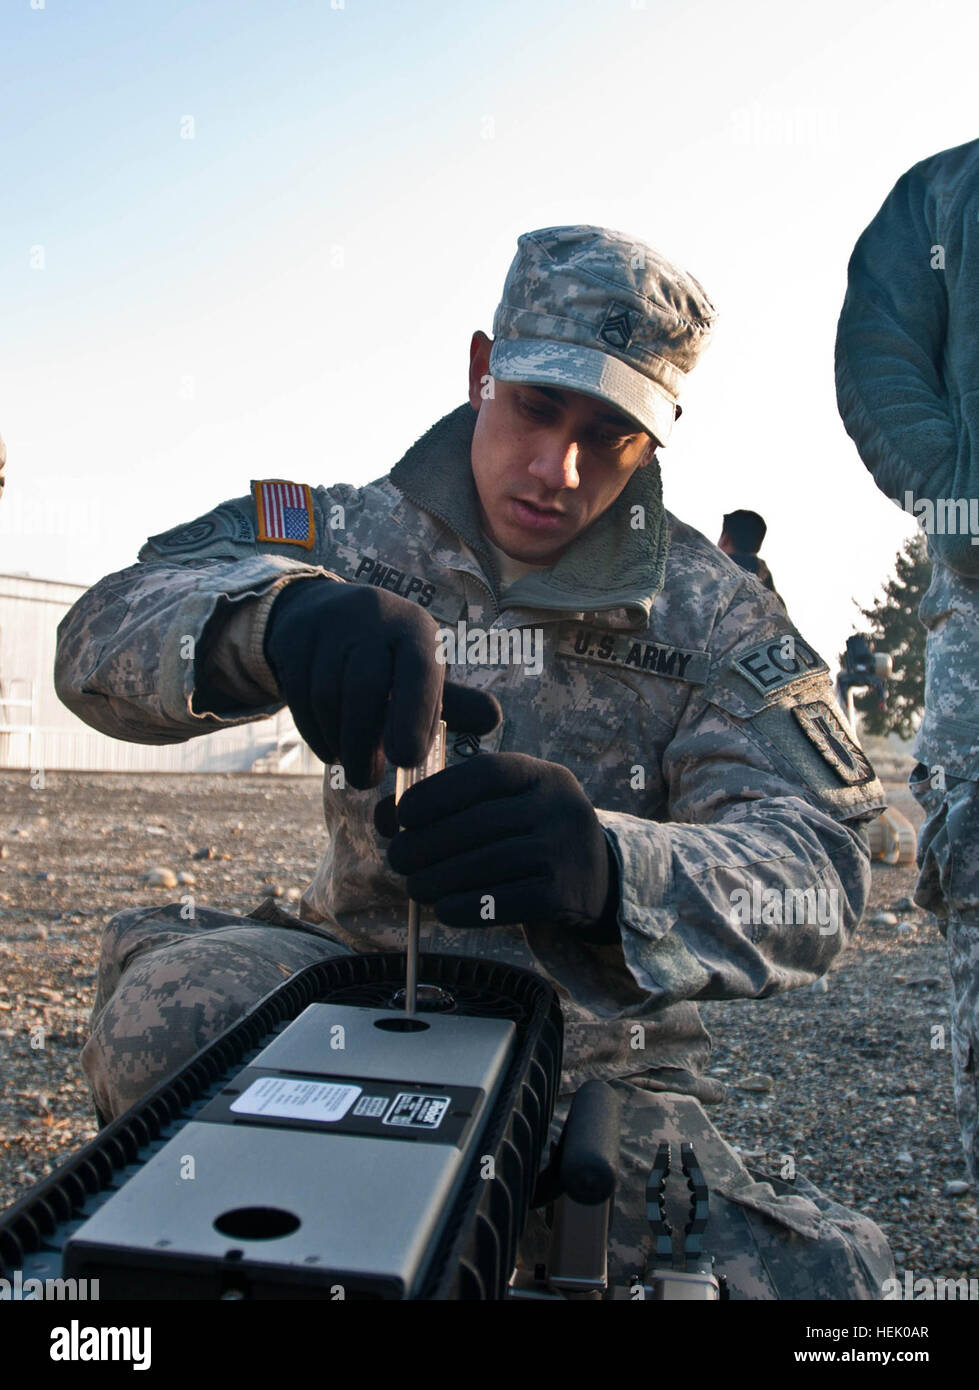 Staff Sgt. Christopher Phelps an explosive ordnance disposal team leader prospect, assigned to 49th Ordnance Battalion at Fort Campbell, Ky., works on a Packbot 510 during the EOD Team Leader Training Academy at Joint Base Lewis-McChord, Wash., Dec. 6. The 3rd Ordnance Battalion hosted the 20th Support Command Team Leader Training Academy in order to provide prospective EOD team leaders and team members with realistic scenario-based leader training in a controlled environment. Soldiers train to become EOD leaders 496349 Stock Photo